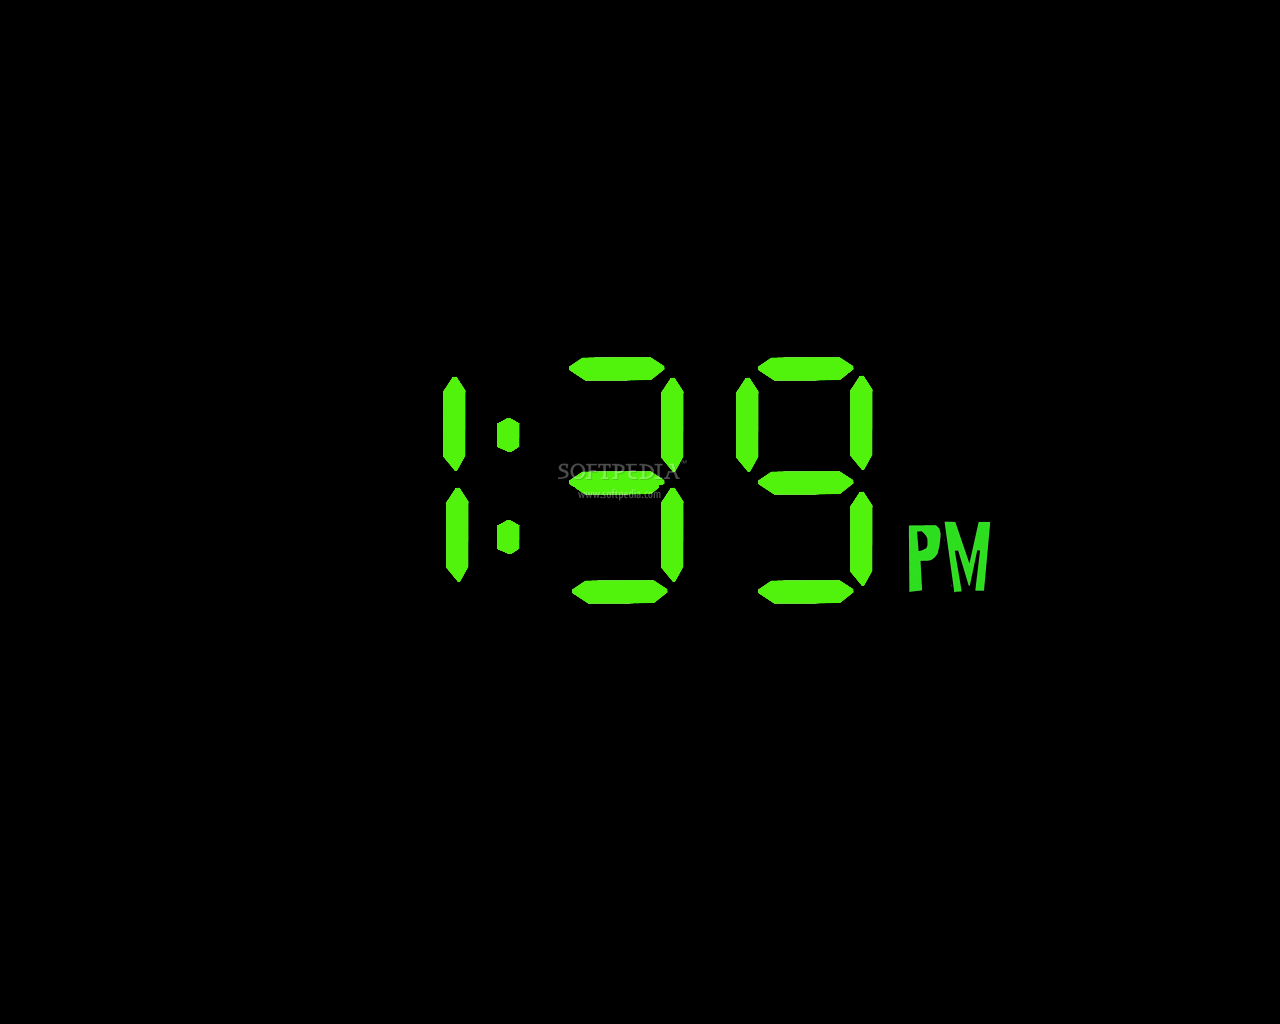 Is How Special Digital Clock Will Display The Time On Your Desktop